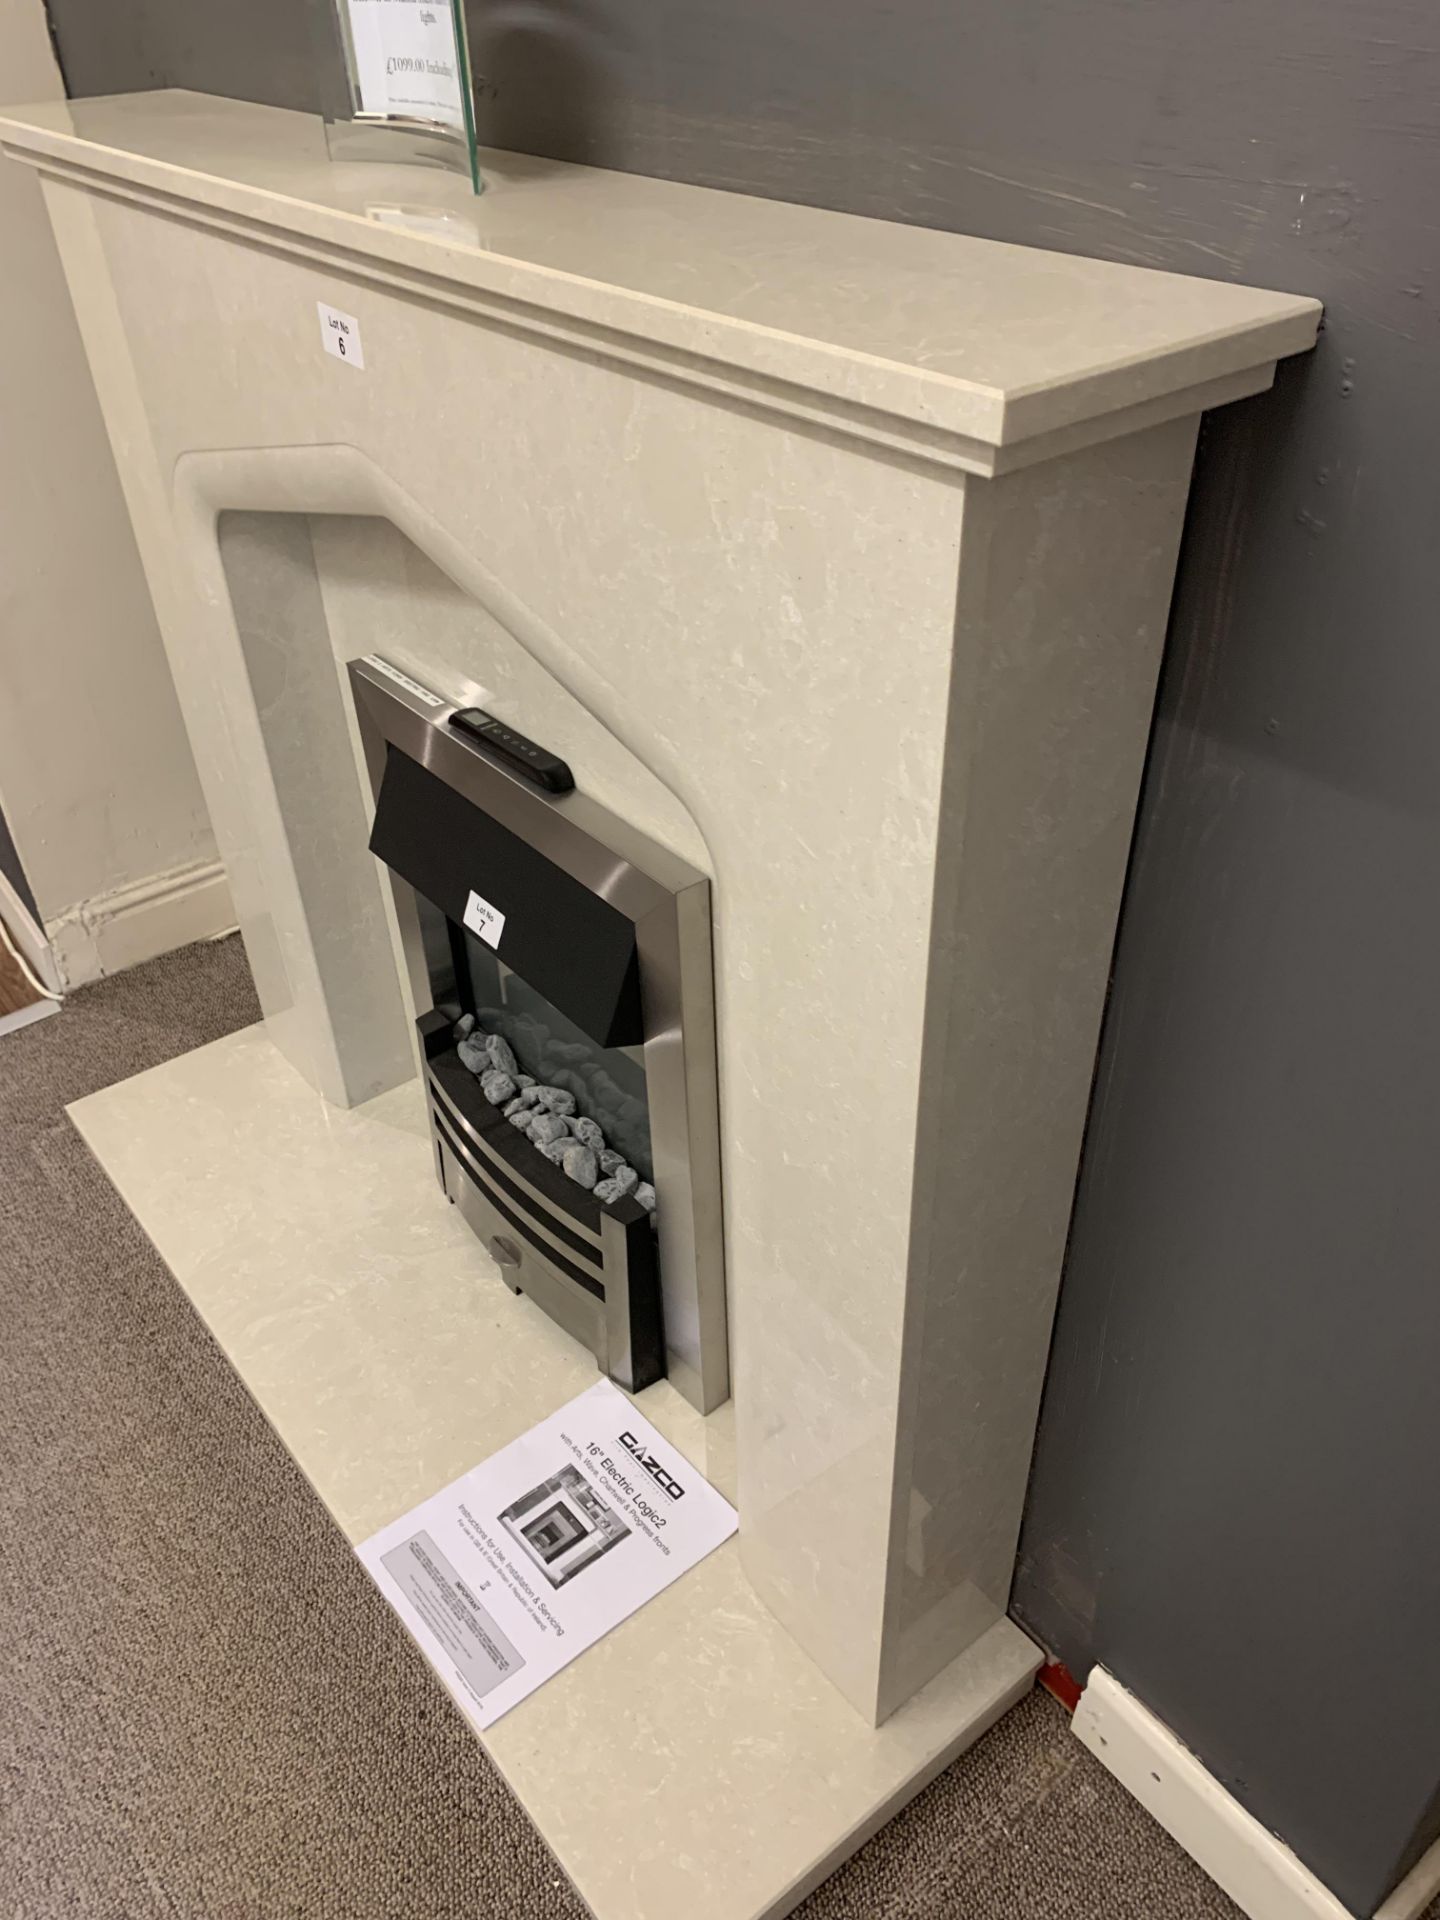 The Verdena fire surround w 48 x h 43.5 - Image 4 of 4